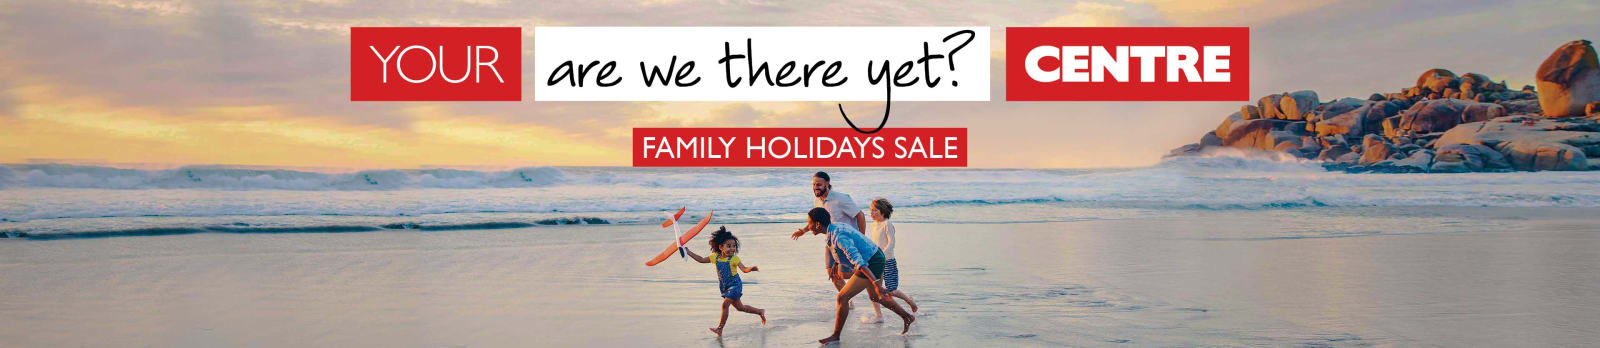 Your are we there yet? Centre | Family holidays sale